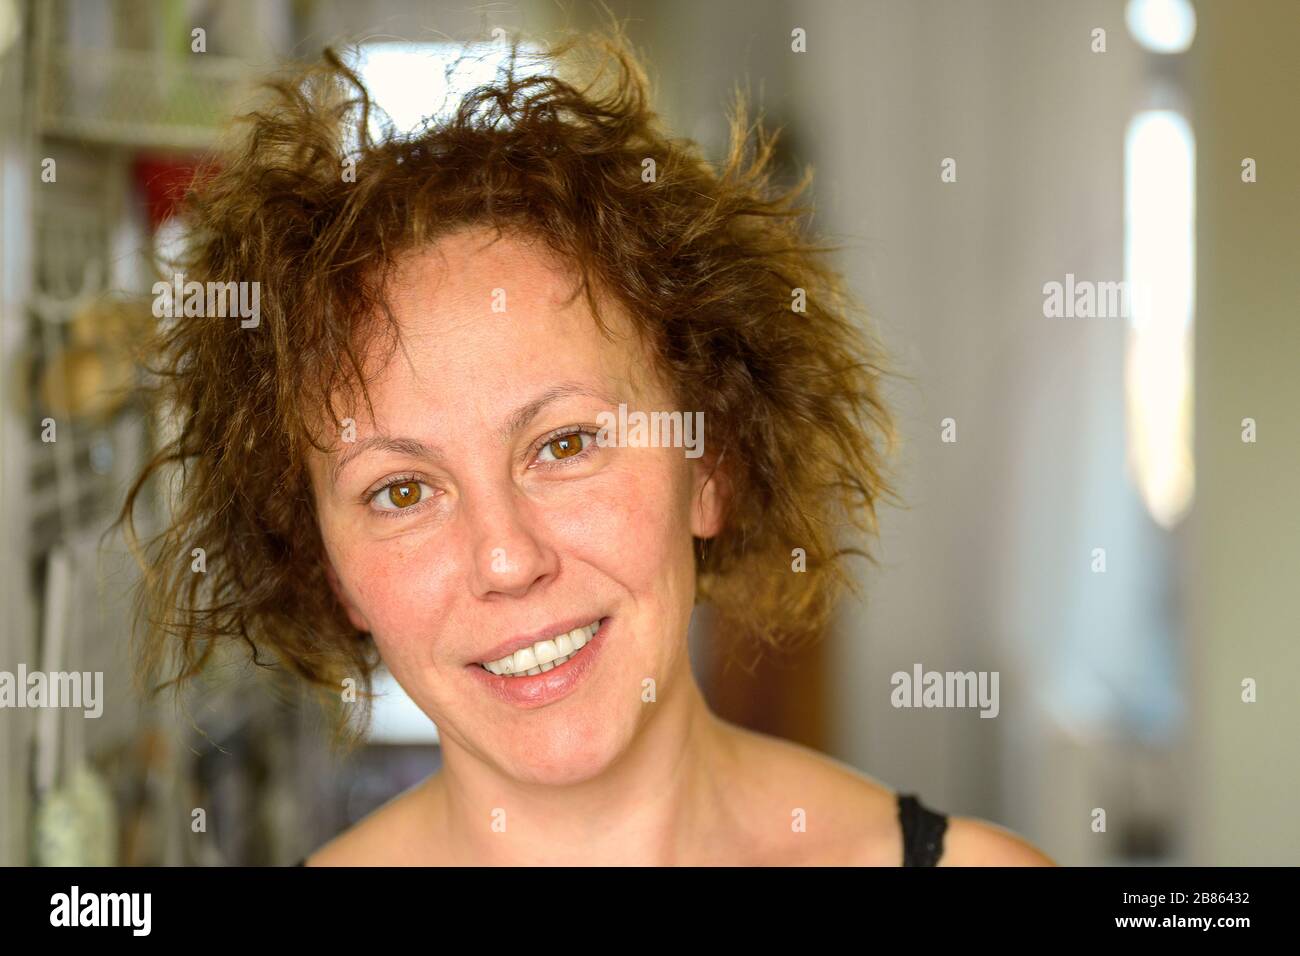 Attractive natural Hispanic woman with curly unruly hair giving the camera a quiet smile on a bad hair day indoors at home Stock Photo